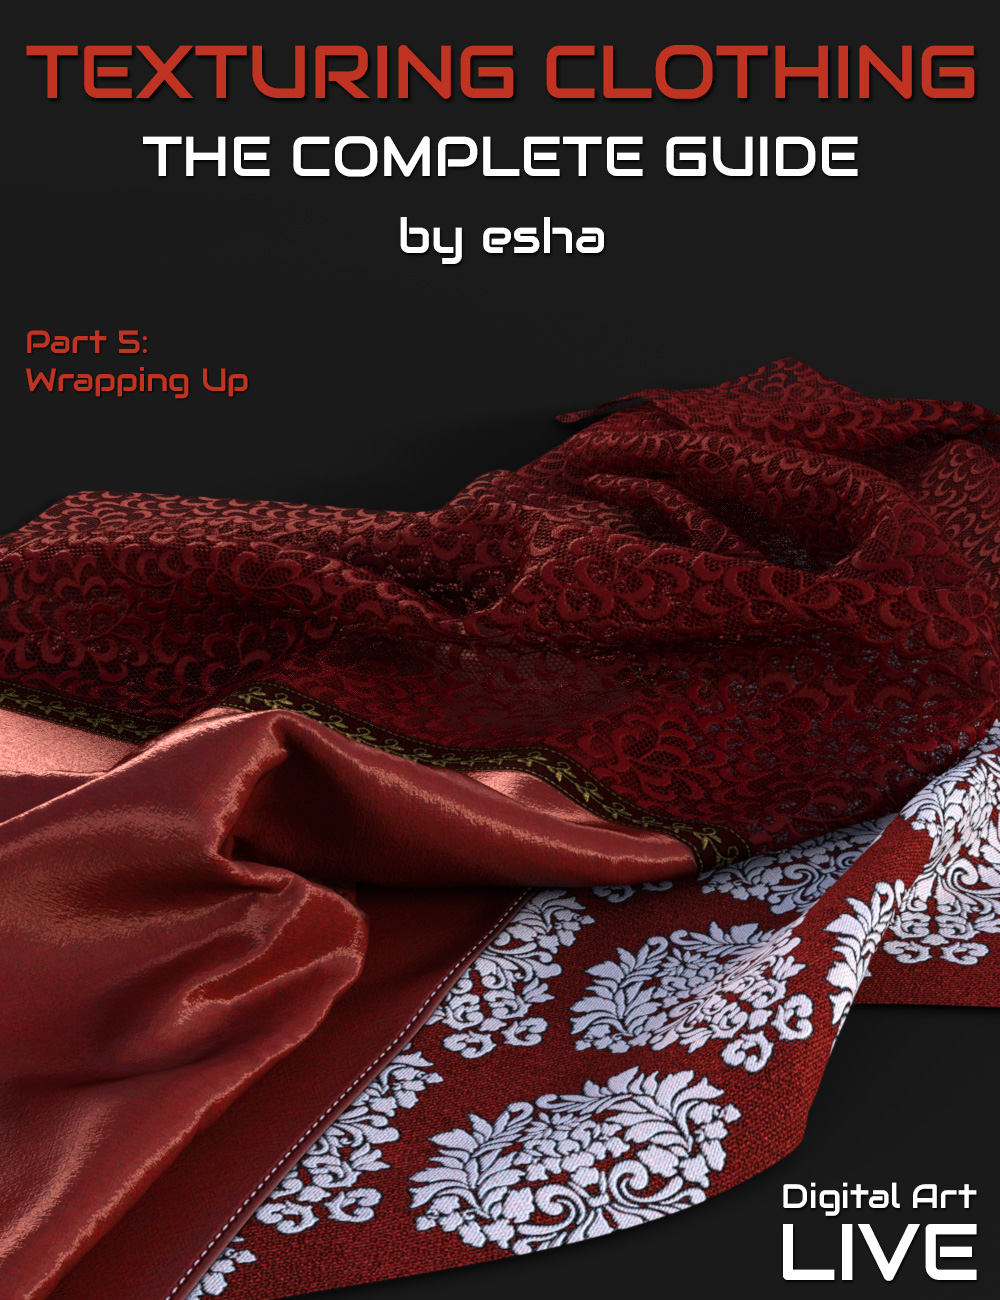 The Complete Guide to Texturing Clothing - Part 5 by: eshaCganDigital Art Live, 3D Models by Daz 3D